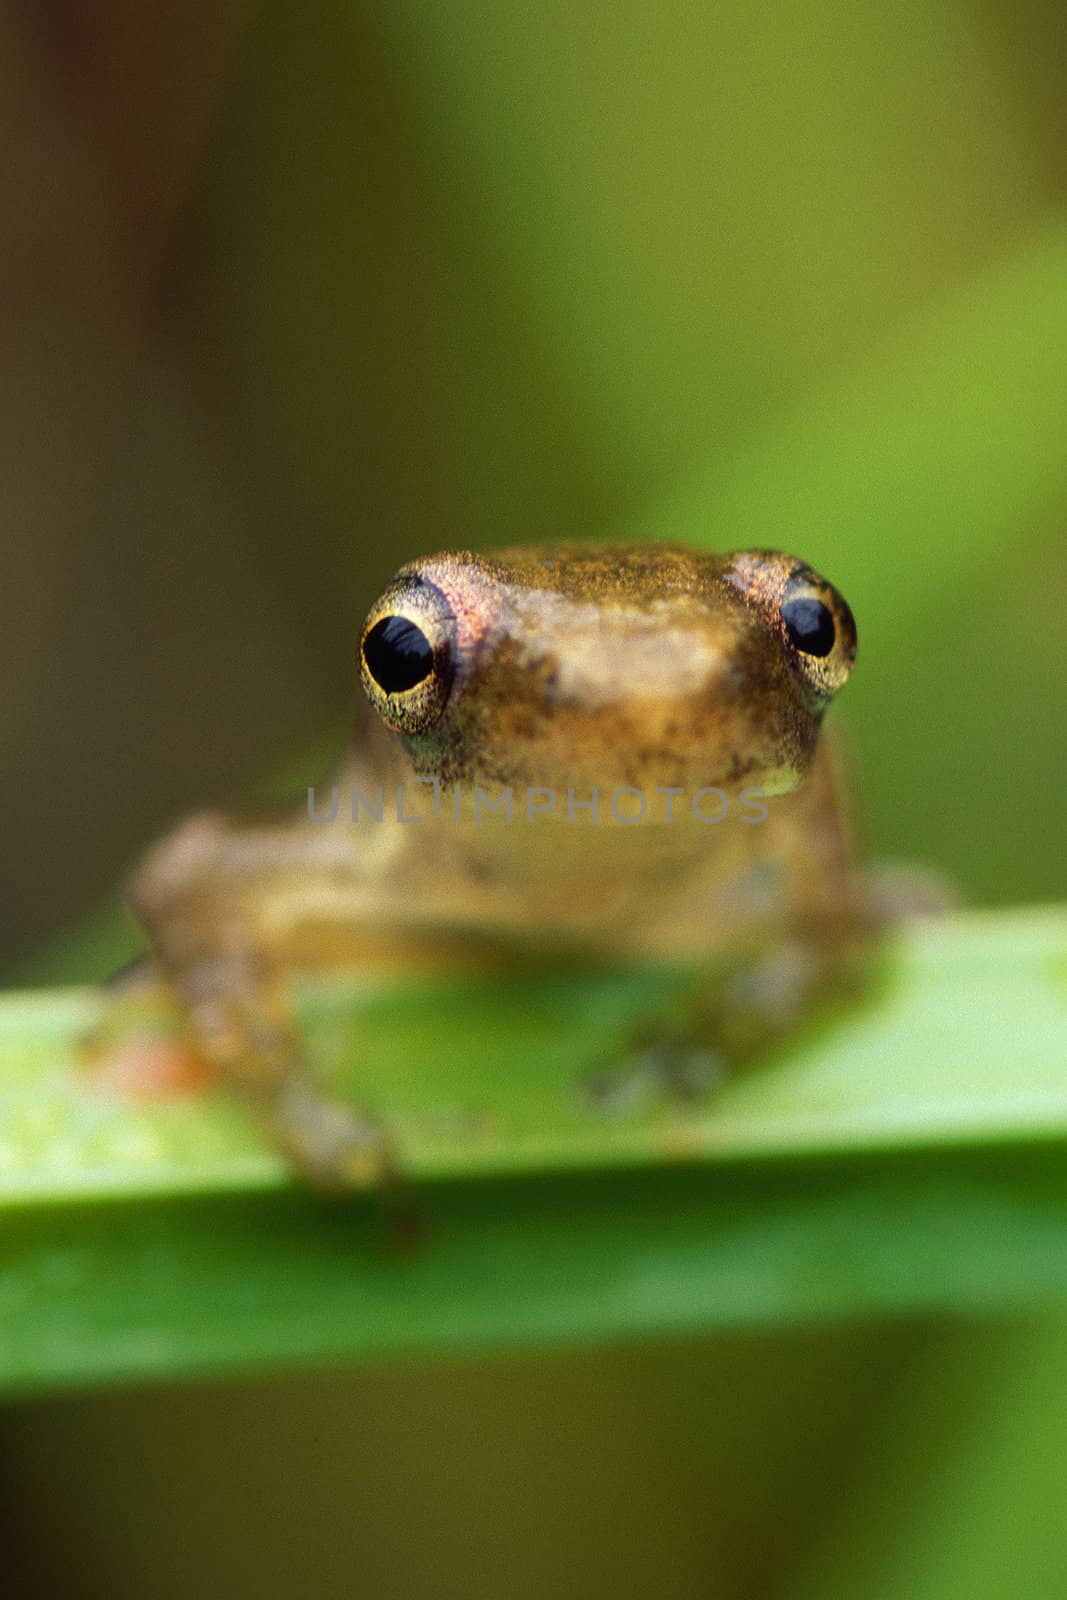 Tiny tree frog on grass stem looking directly into camera